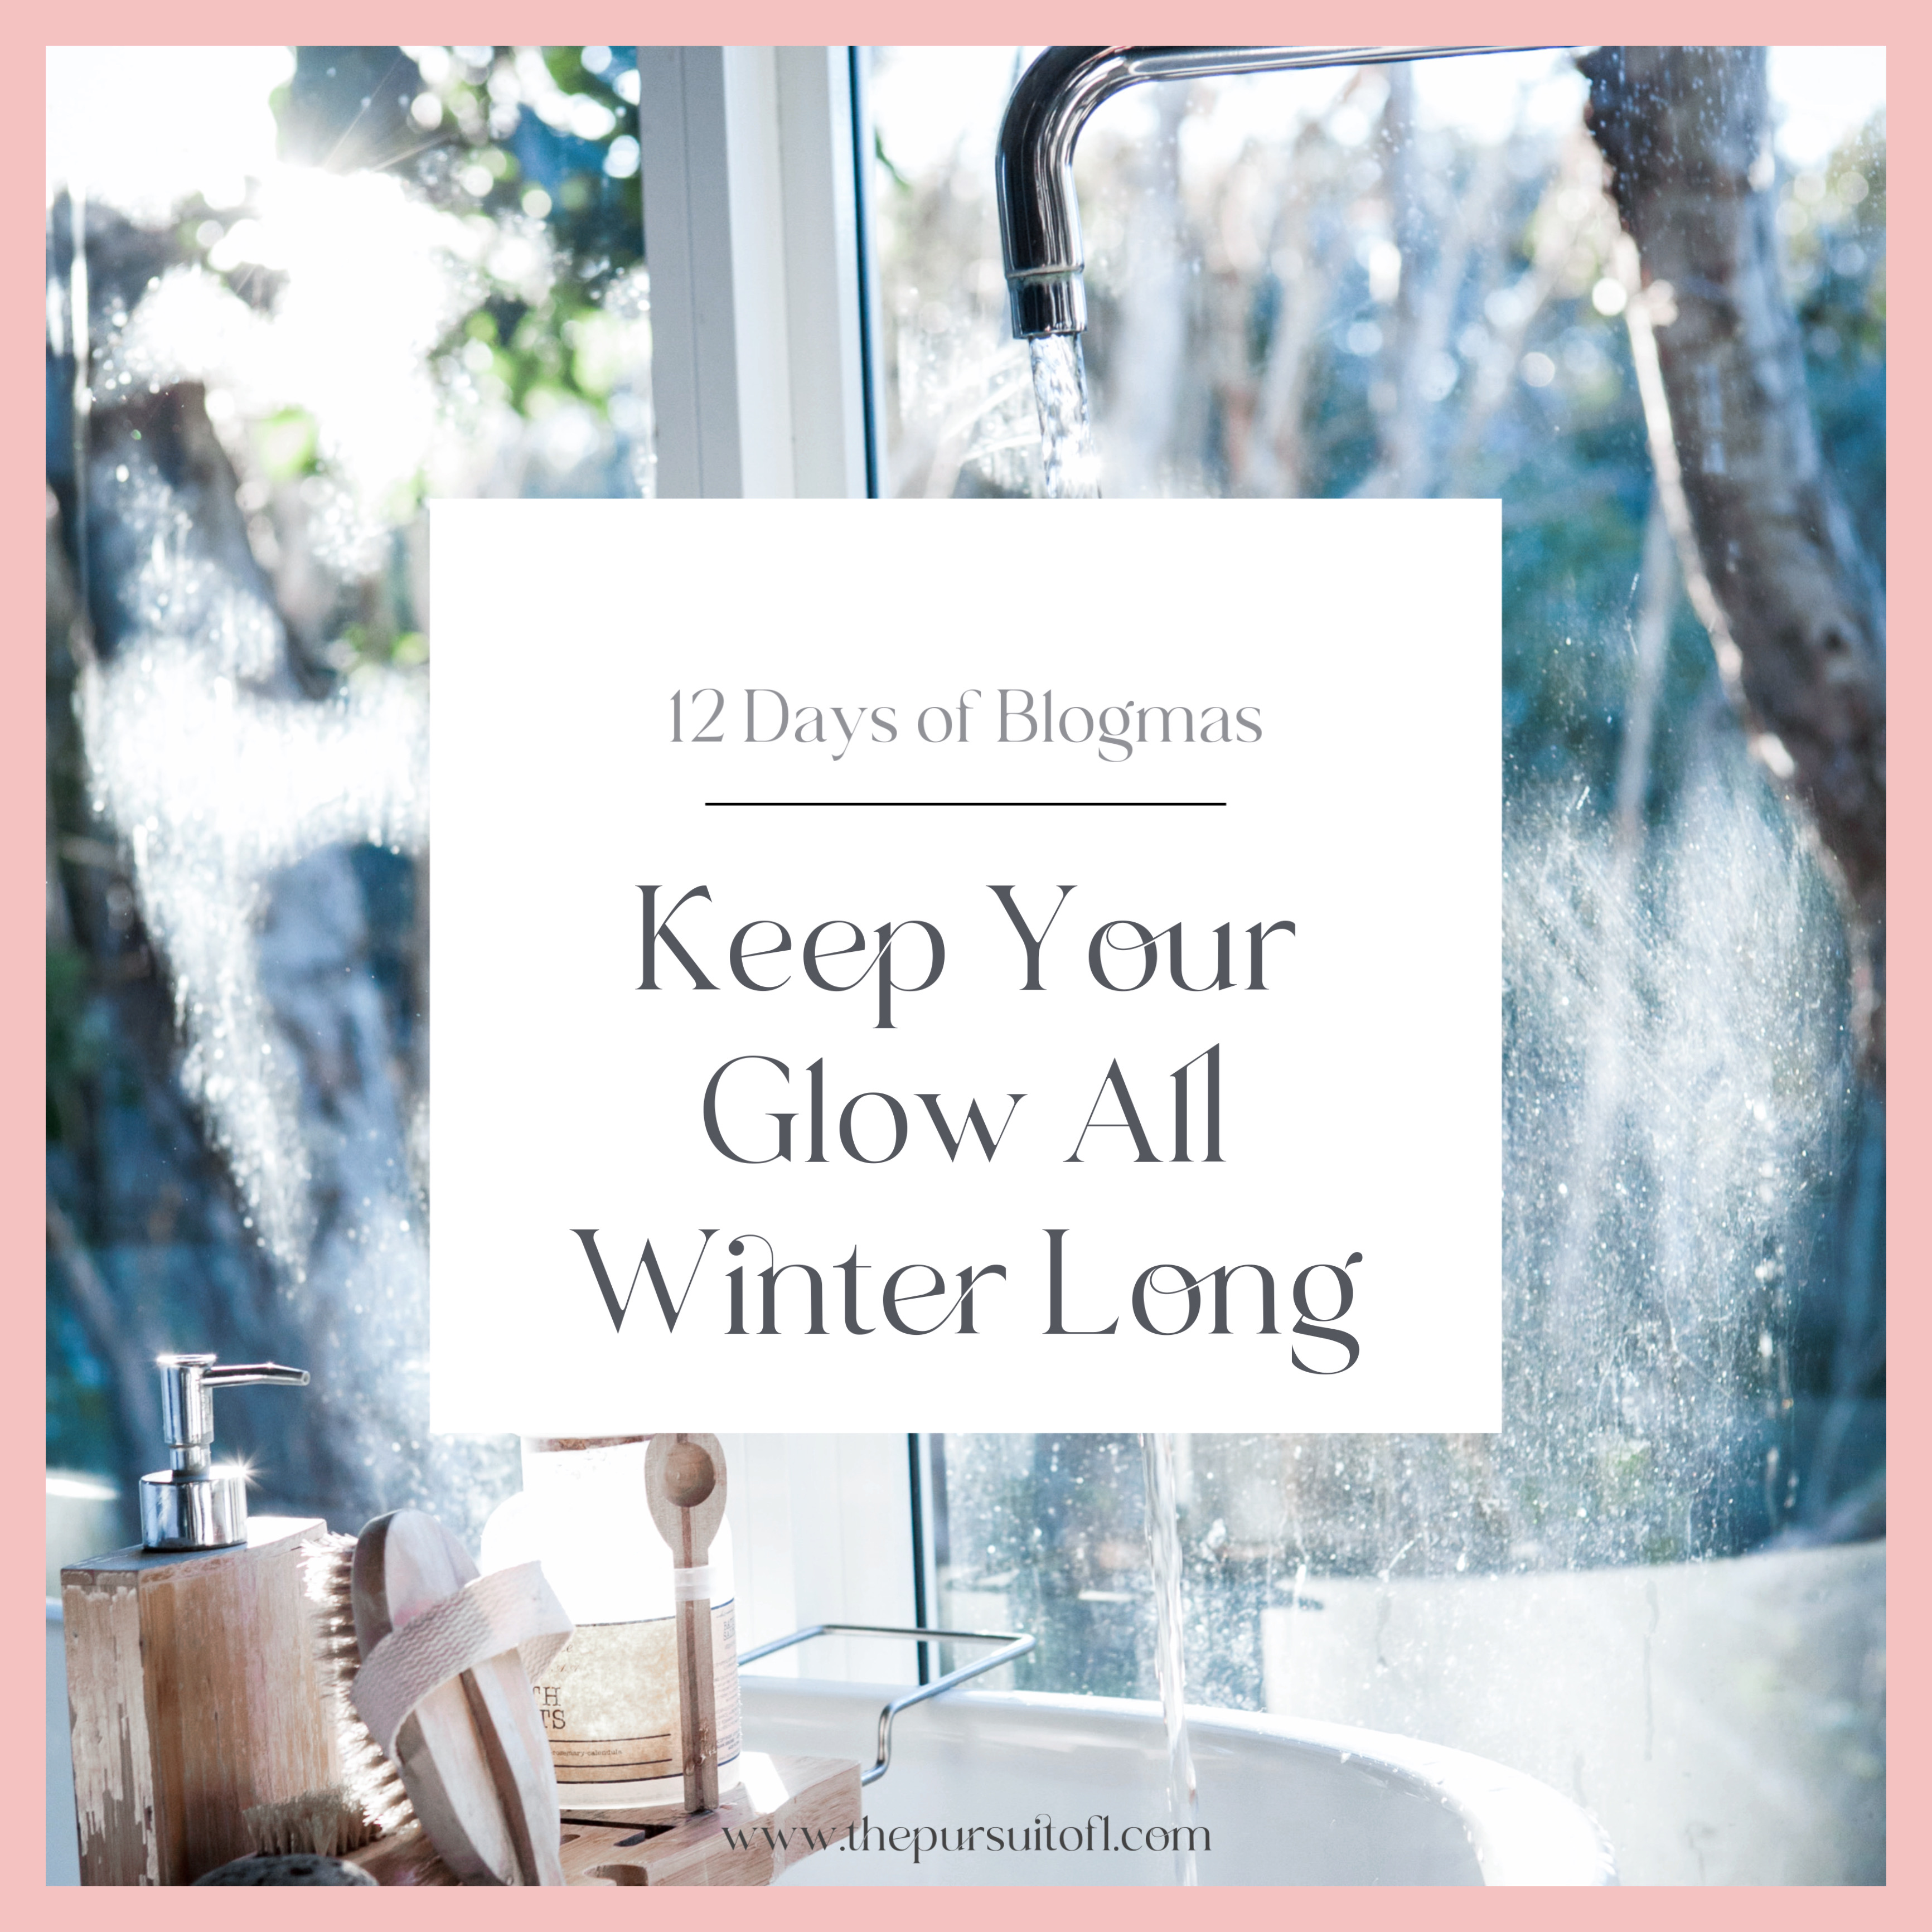 12 Days of Blogmas, Keep Your Glow All Winter Long, Winter Skincare